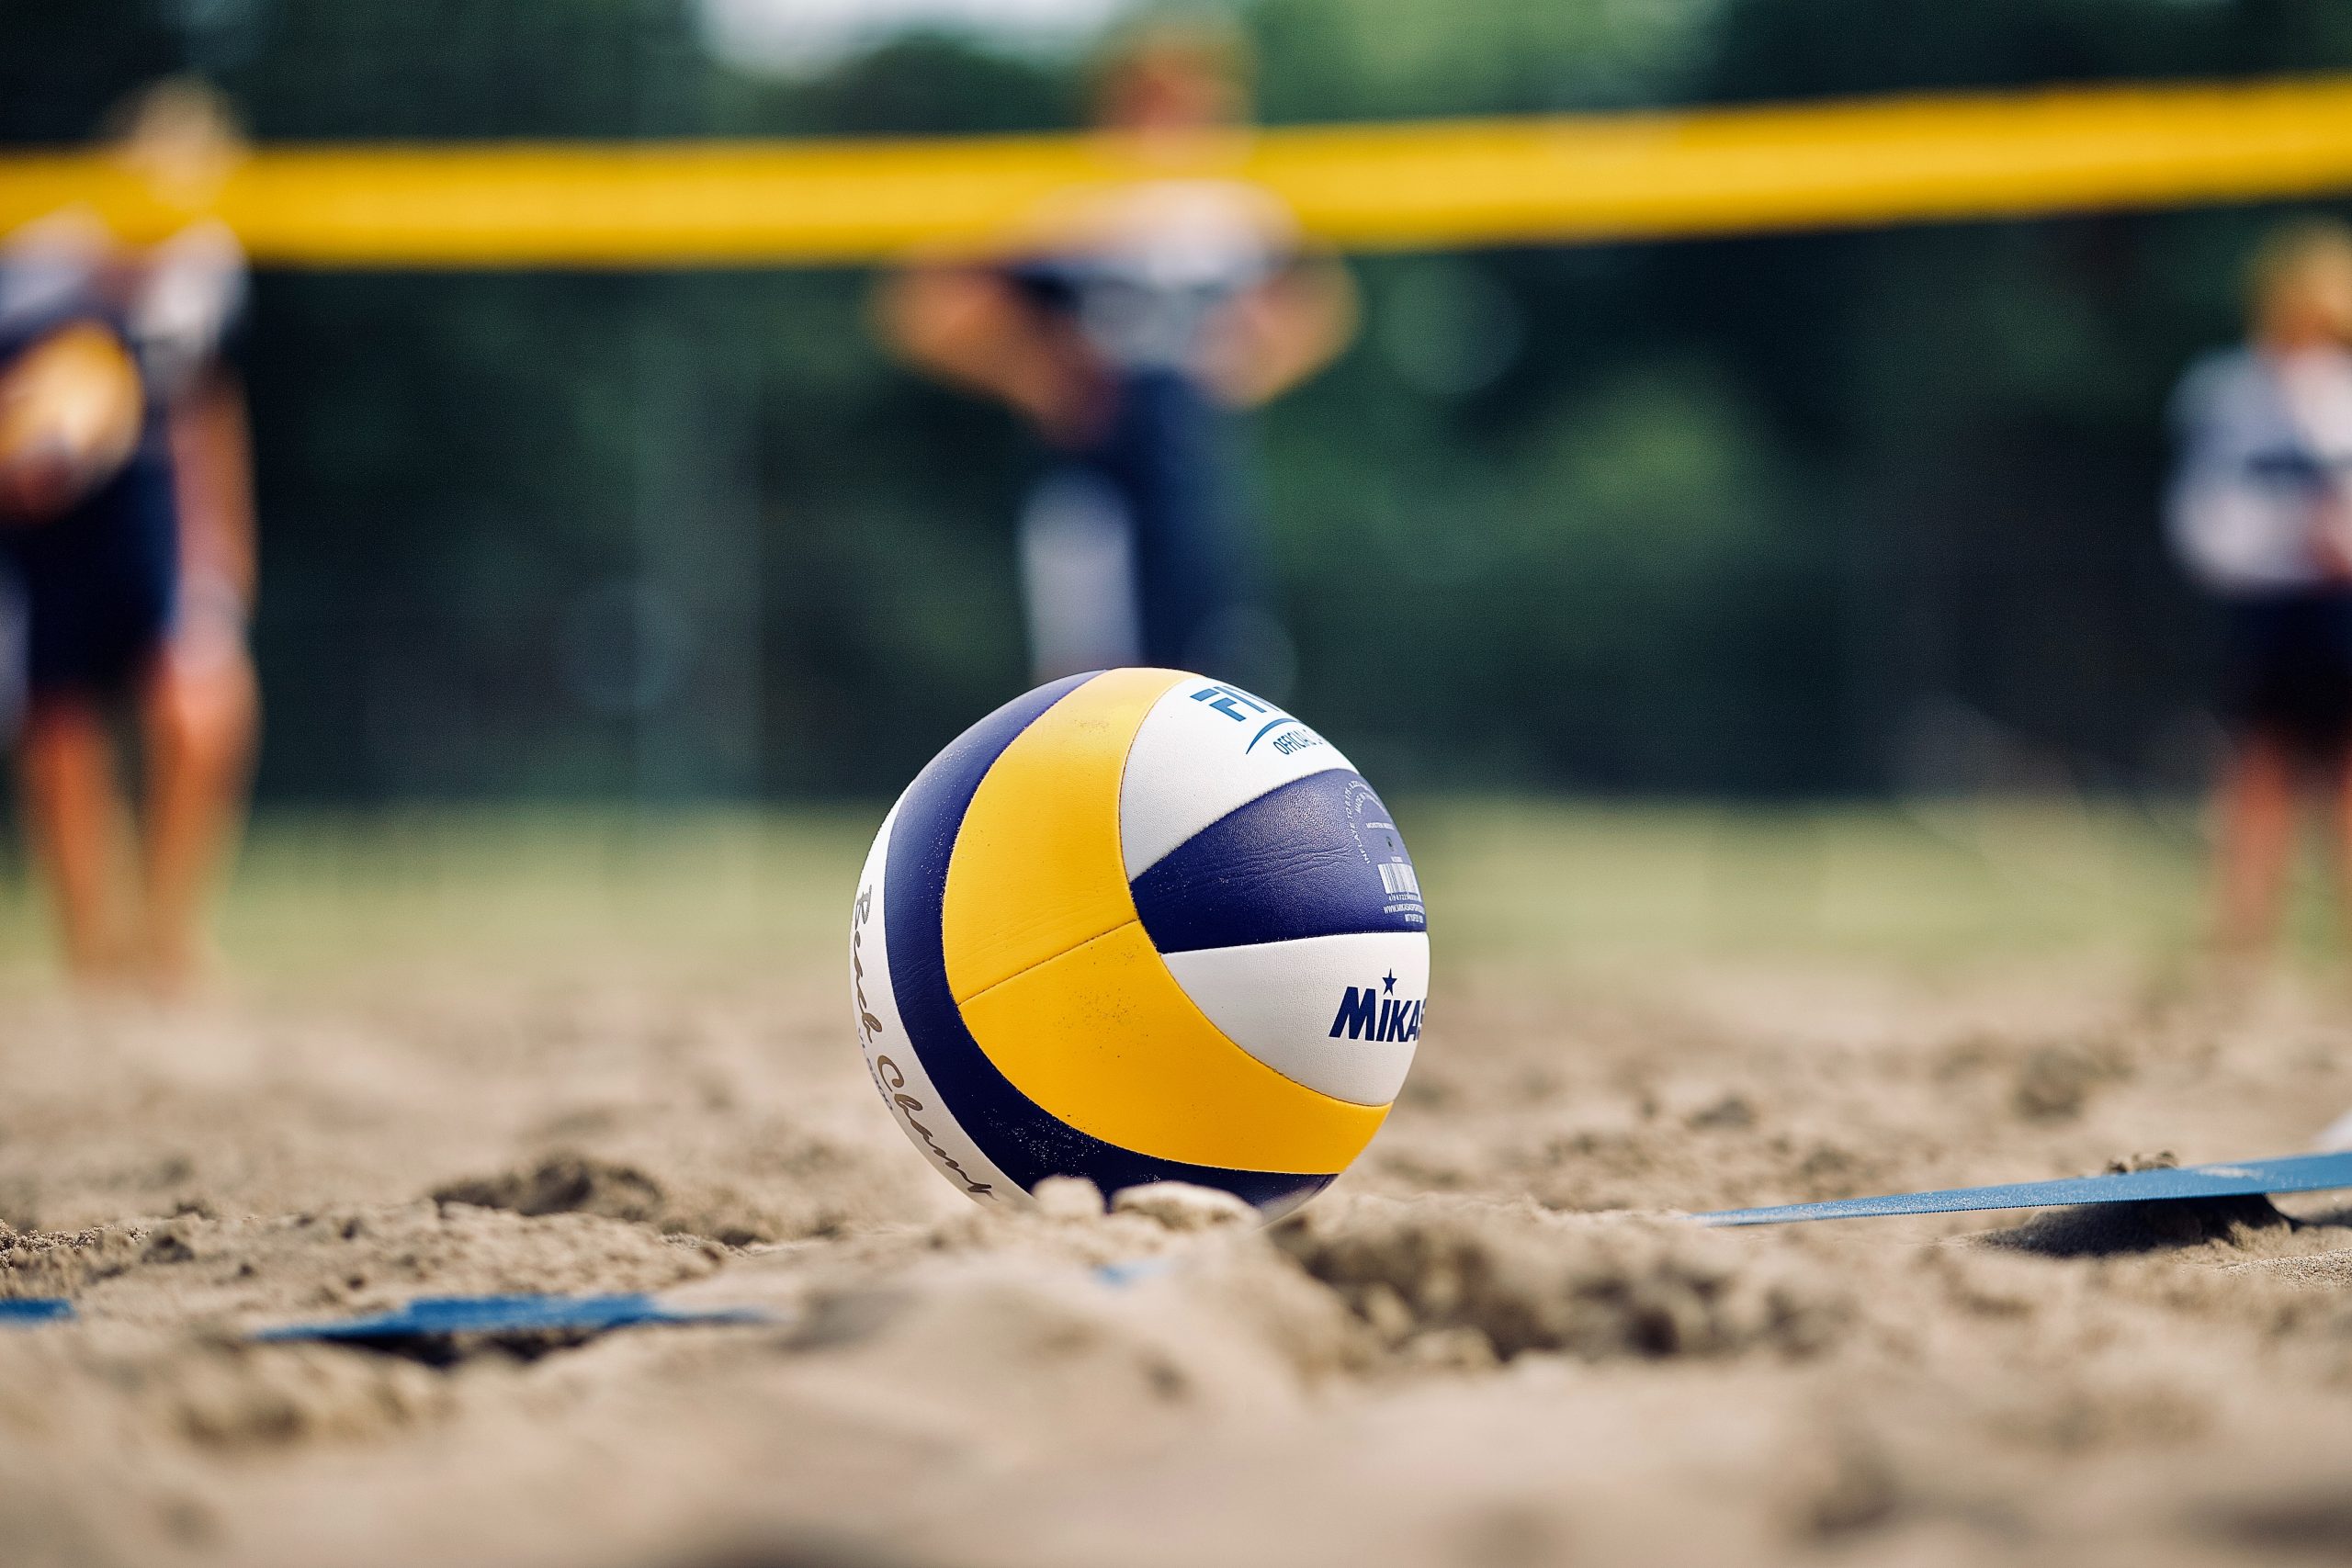 Types Of Volleyball Online Buy, Save 61 jlcatj.gob.mx